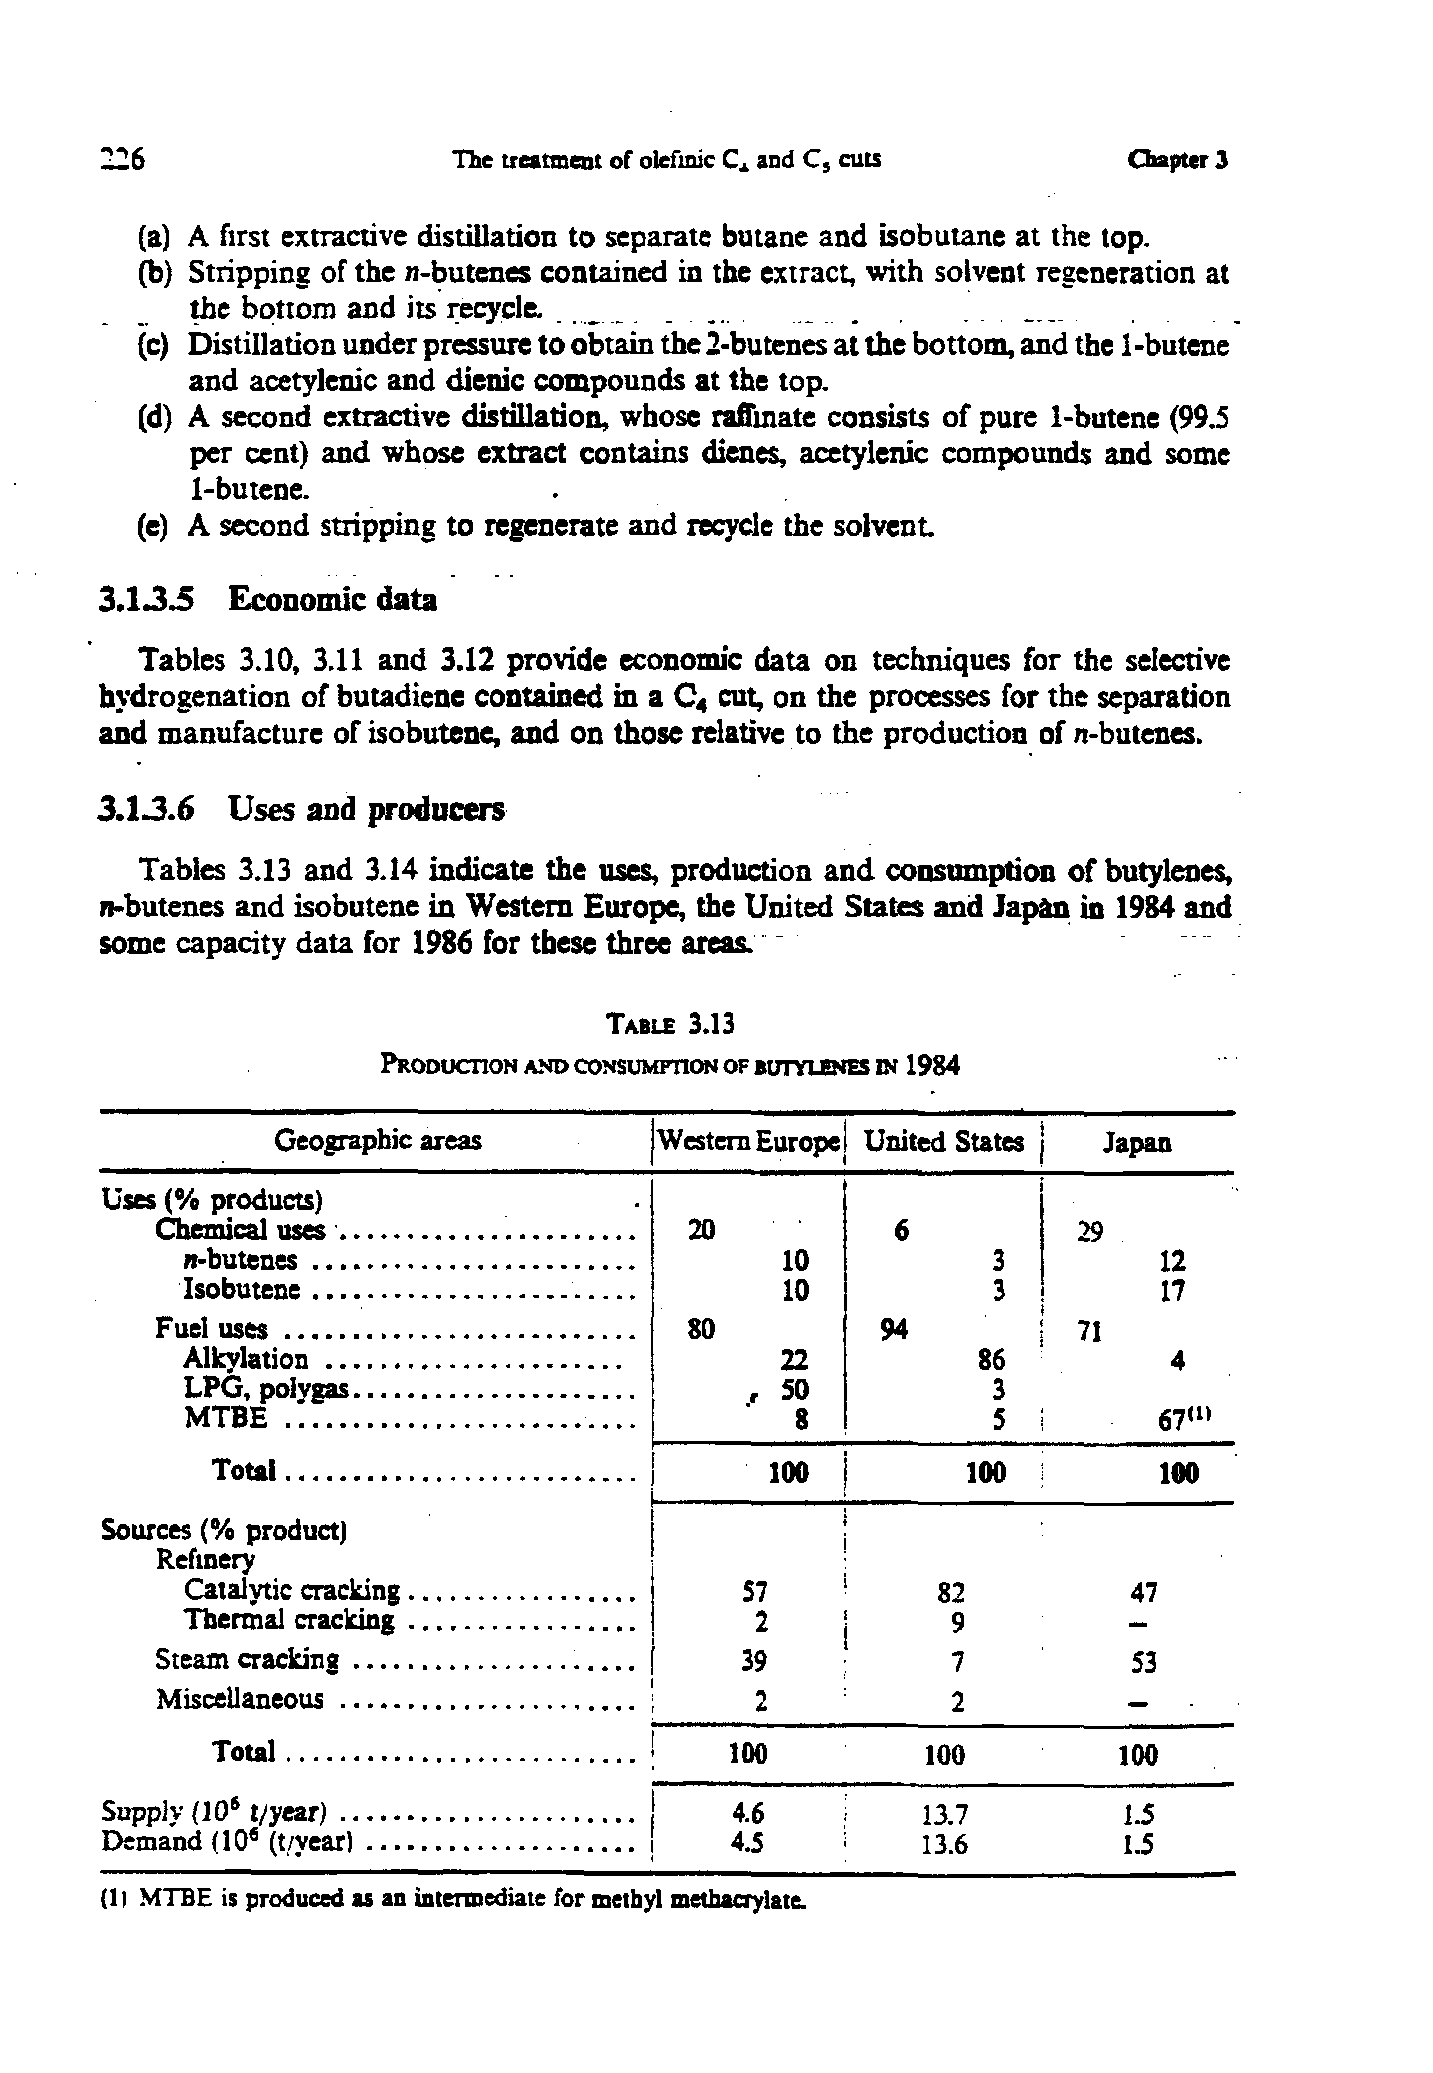 Tables 3.10, 3.11 and 3.12 provide economic data on techniques for the selective hydrogenation of butadiene contained in a C4 cut, on the processes for the separation and manufacture of isobutene, and on those relative to the production of n-butenes.